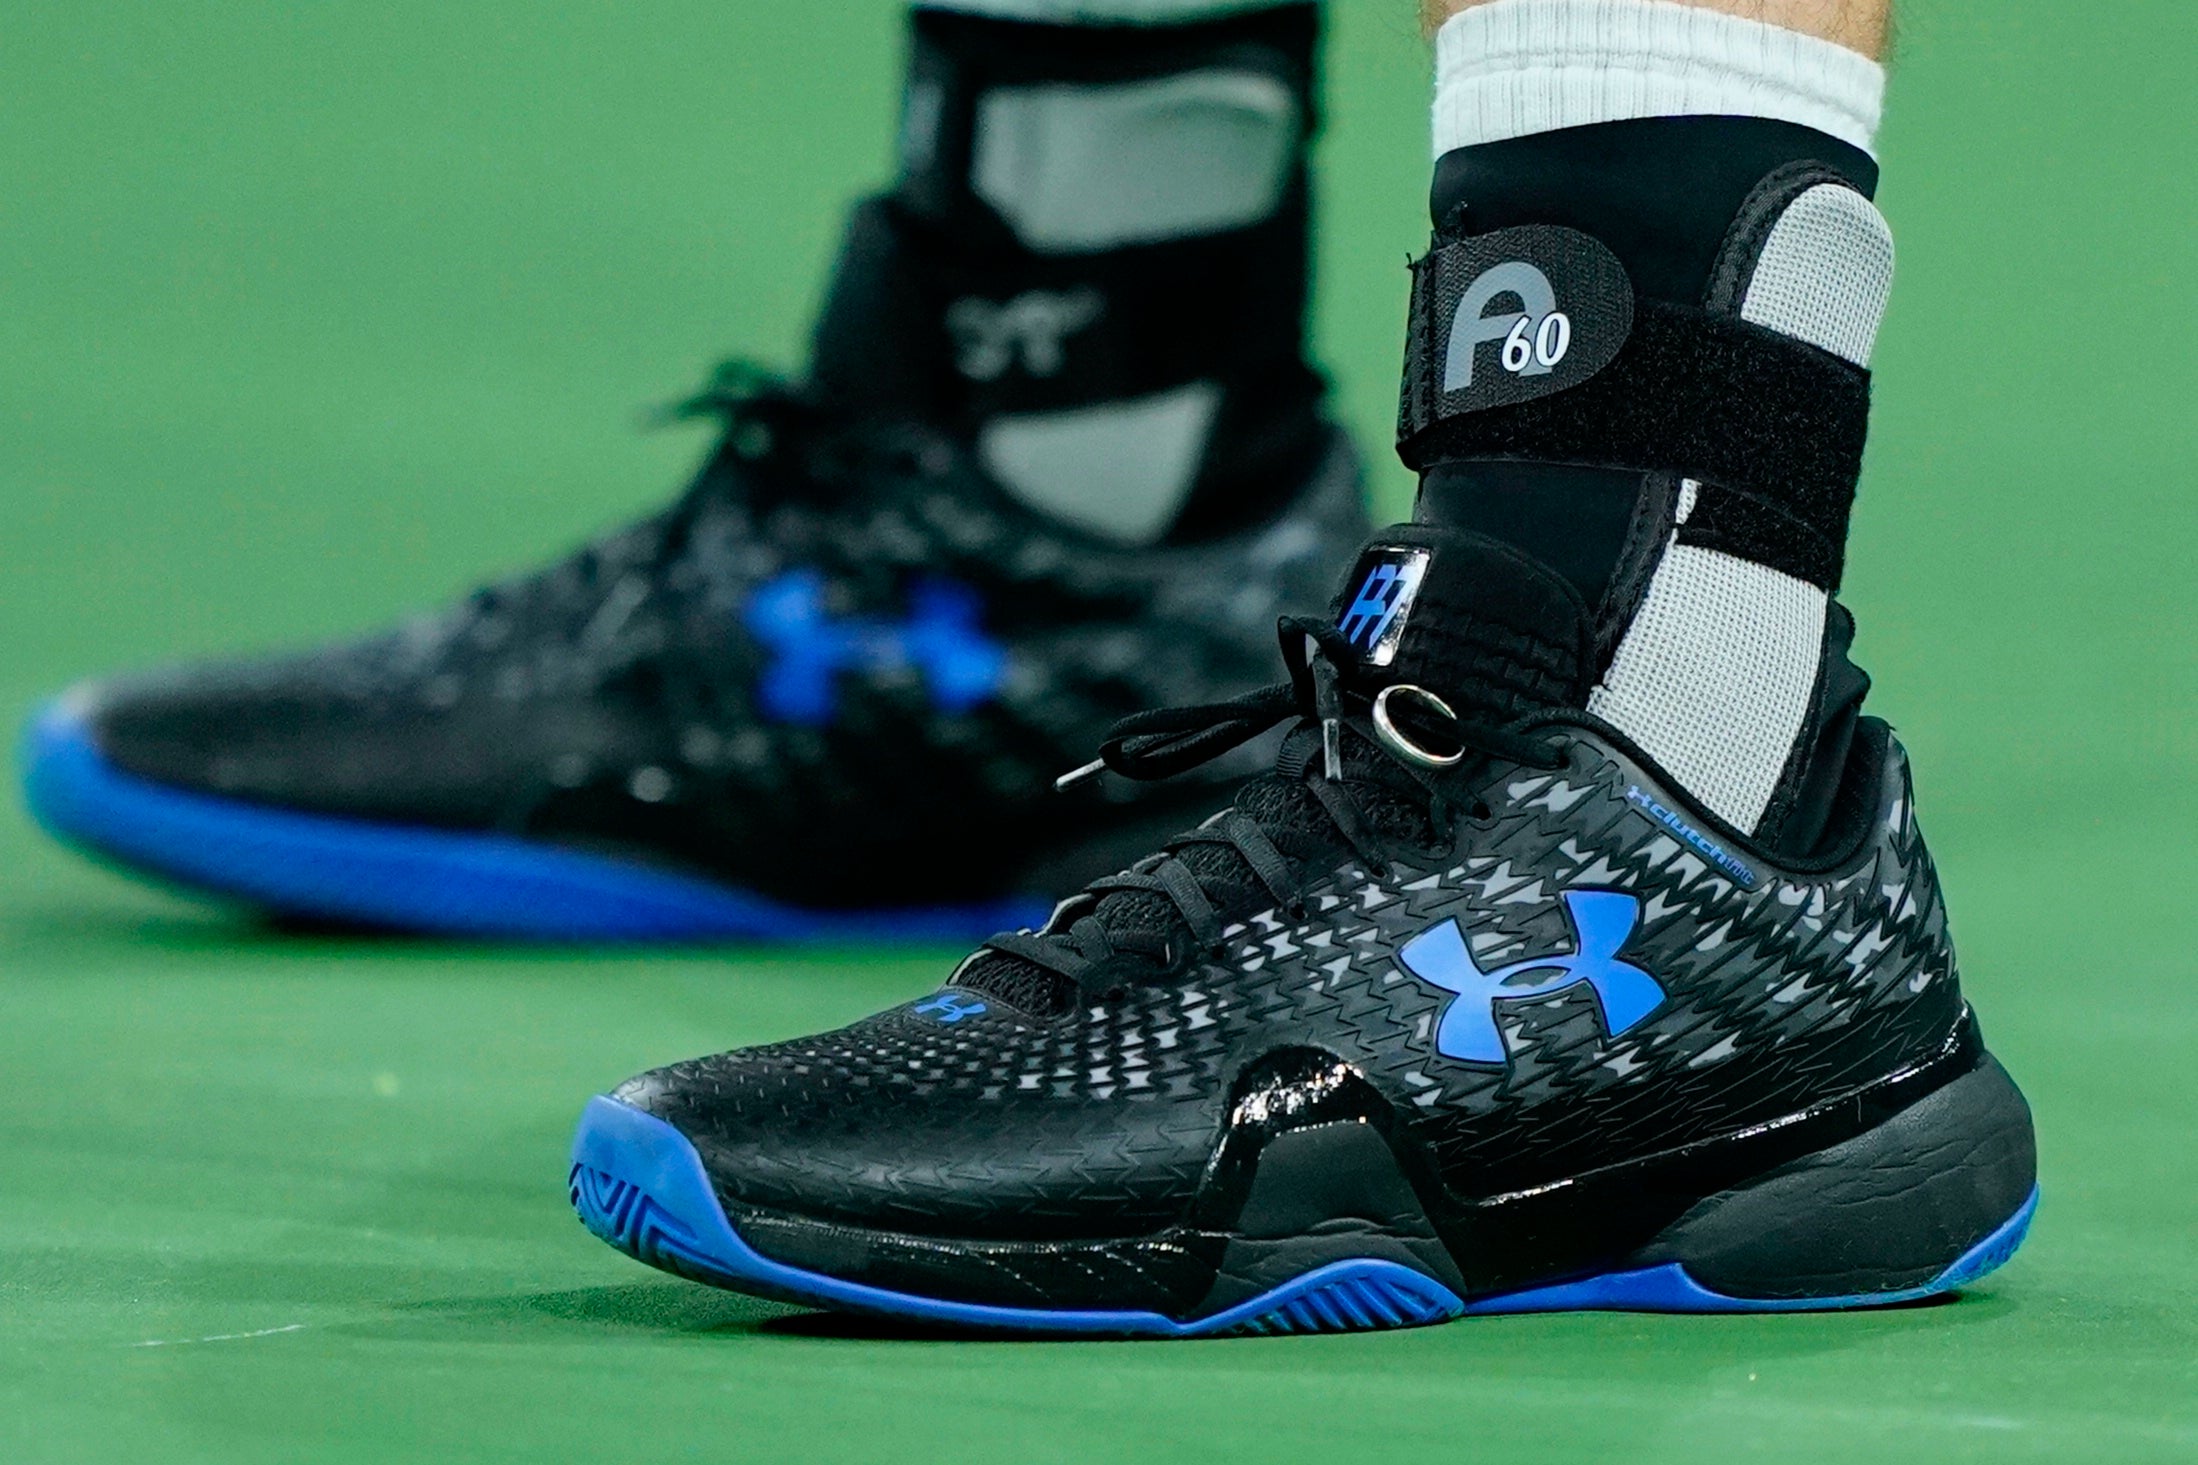 Andy Murray’s wedding ring was back on his trainers as he took on Adrian Mannarino (Mark J. Terrill/AP)